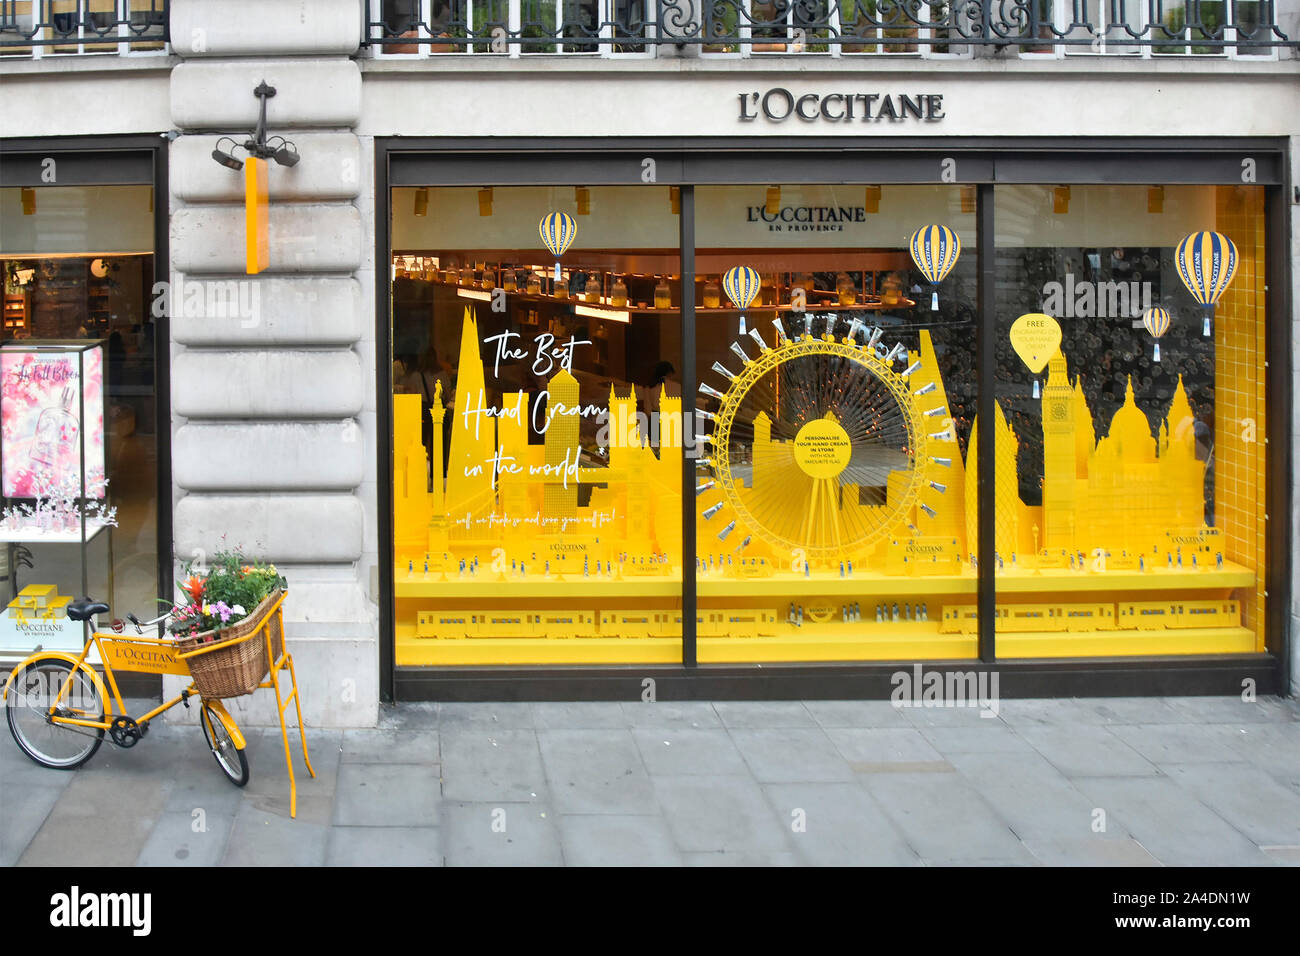 L’Occitane a personal care retail business from Provence looking down from above at  shop front window display & bike Regent Street London England UK Stock Photo